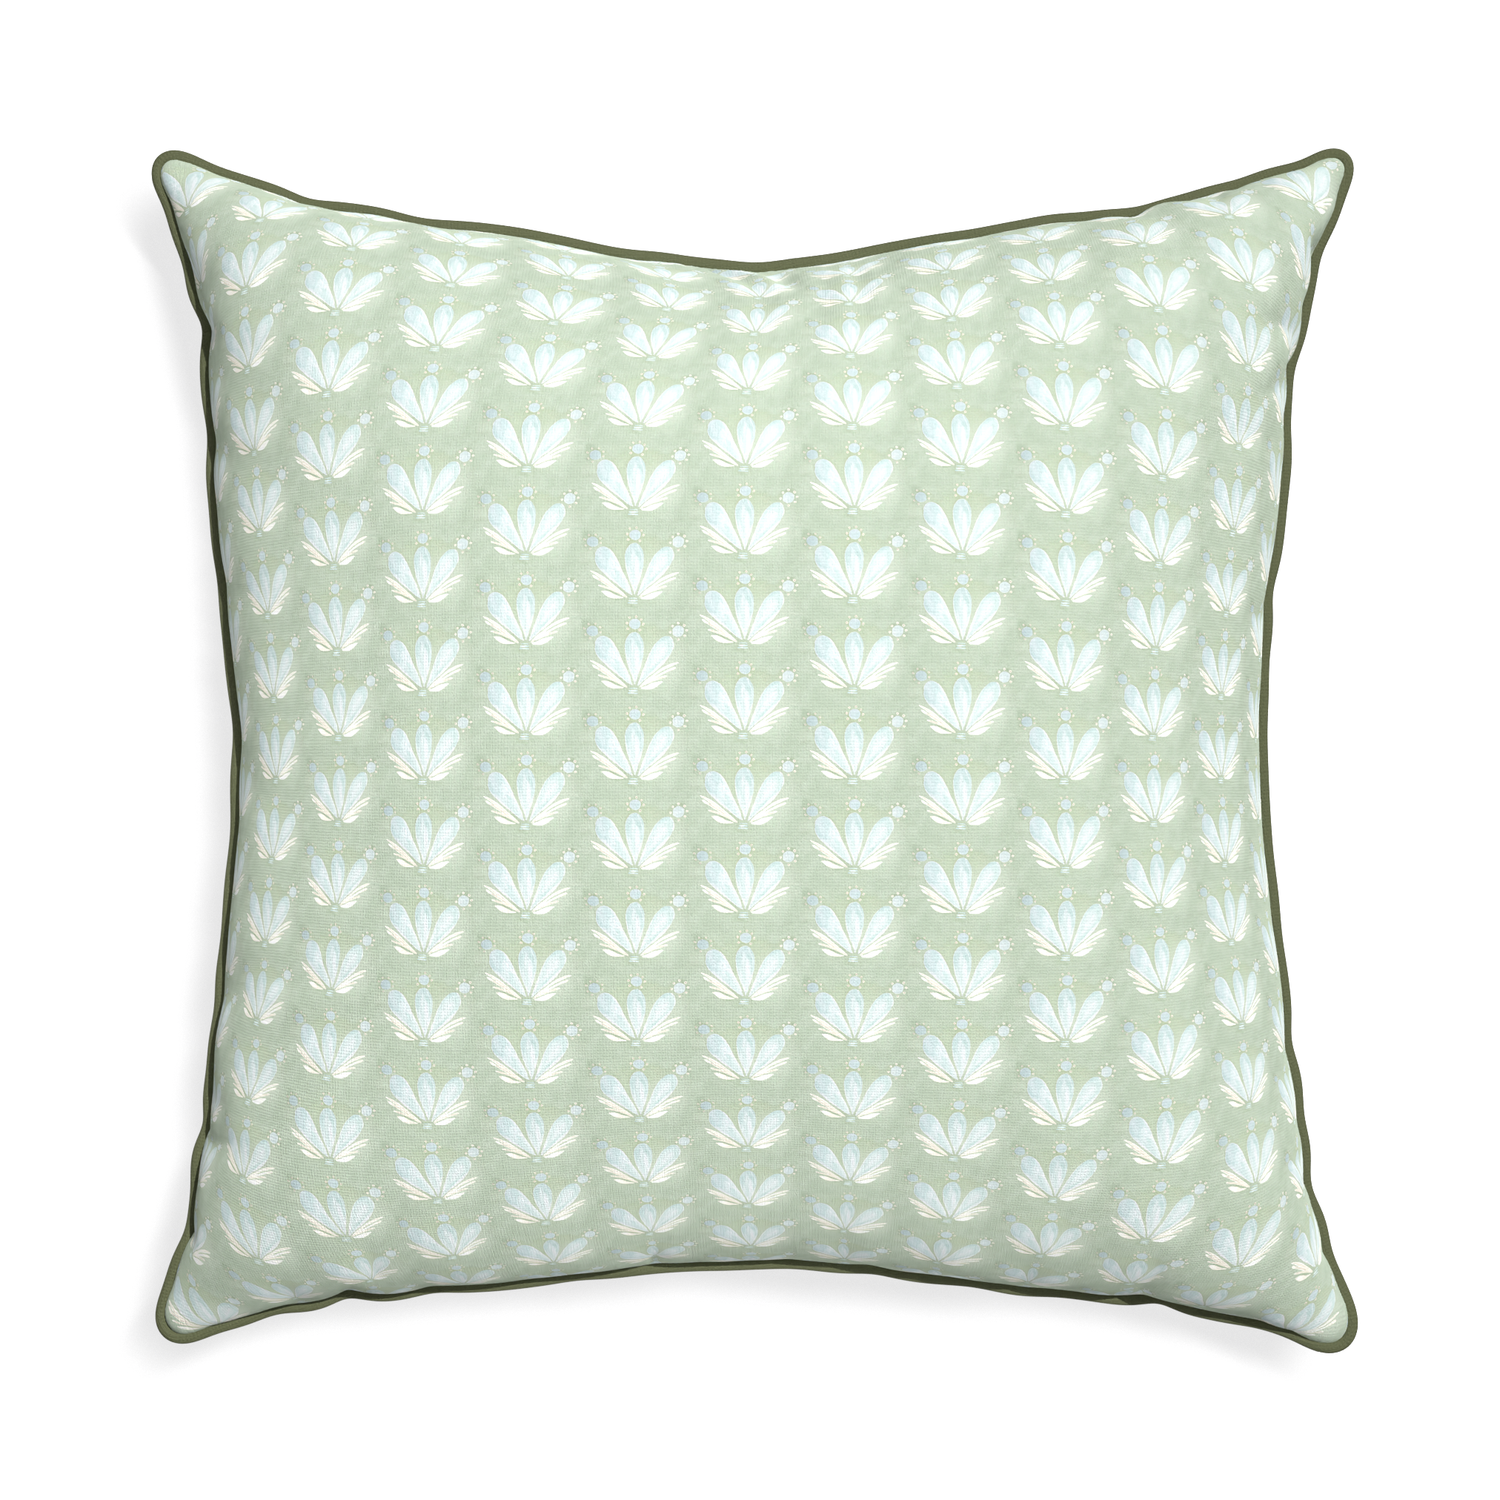 Euro-sham serena sea salt custom pillow with f piping on white background